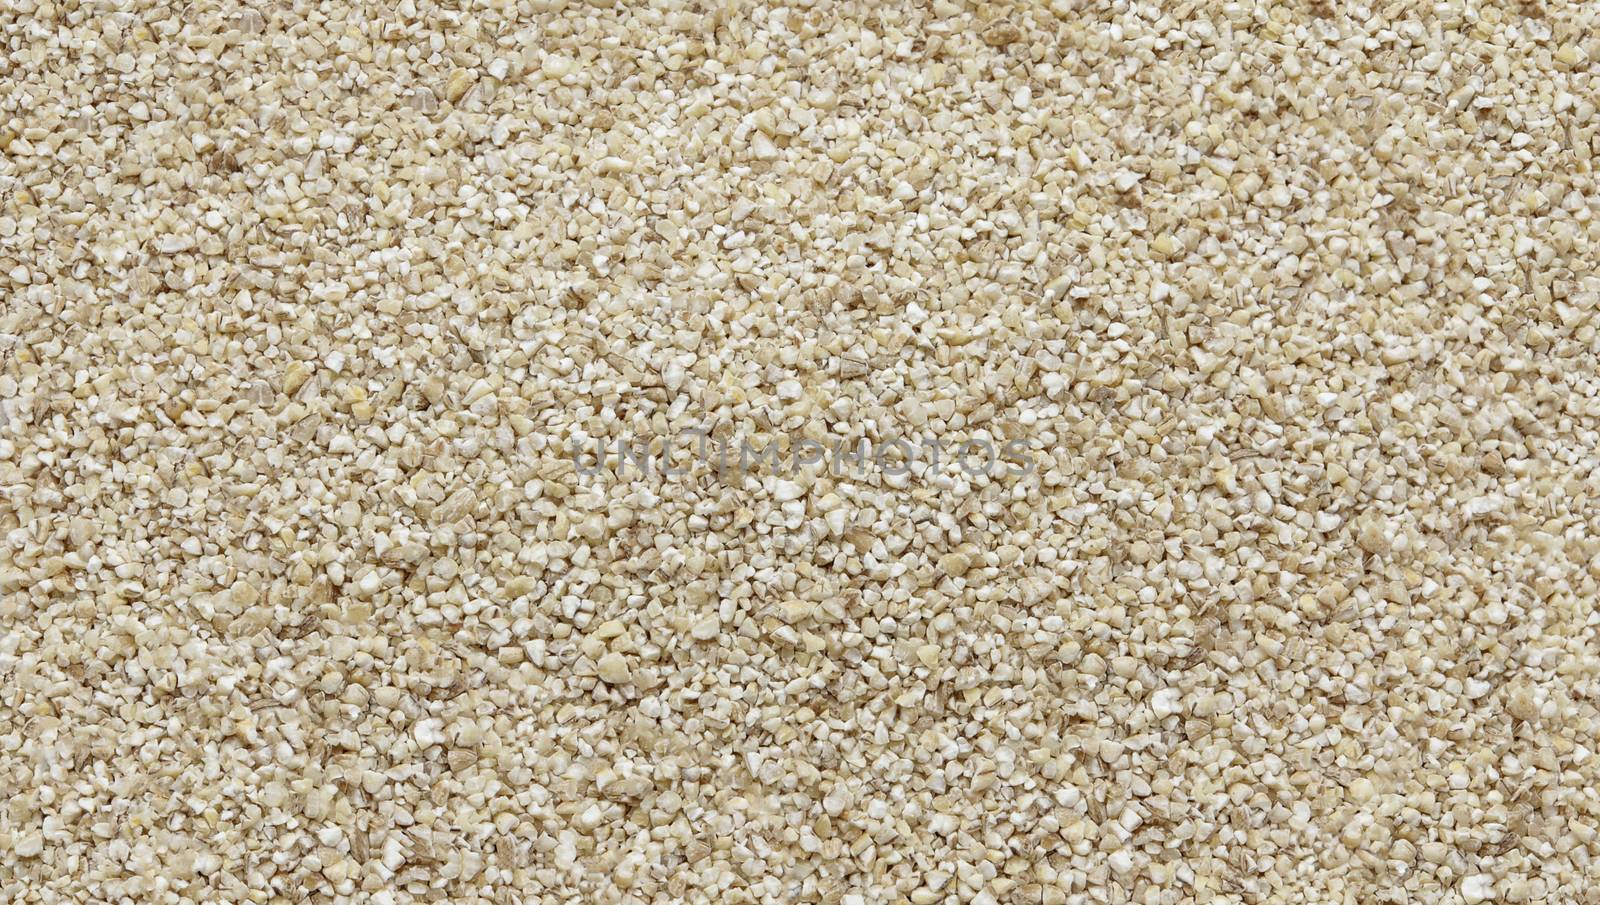 Raw crashed barley -texture and details - traditional food by Studia72